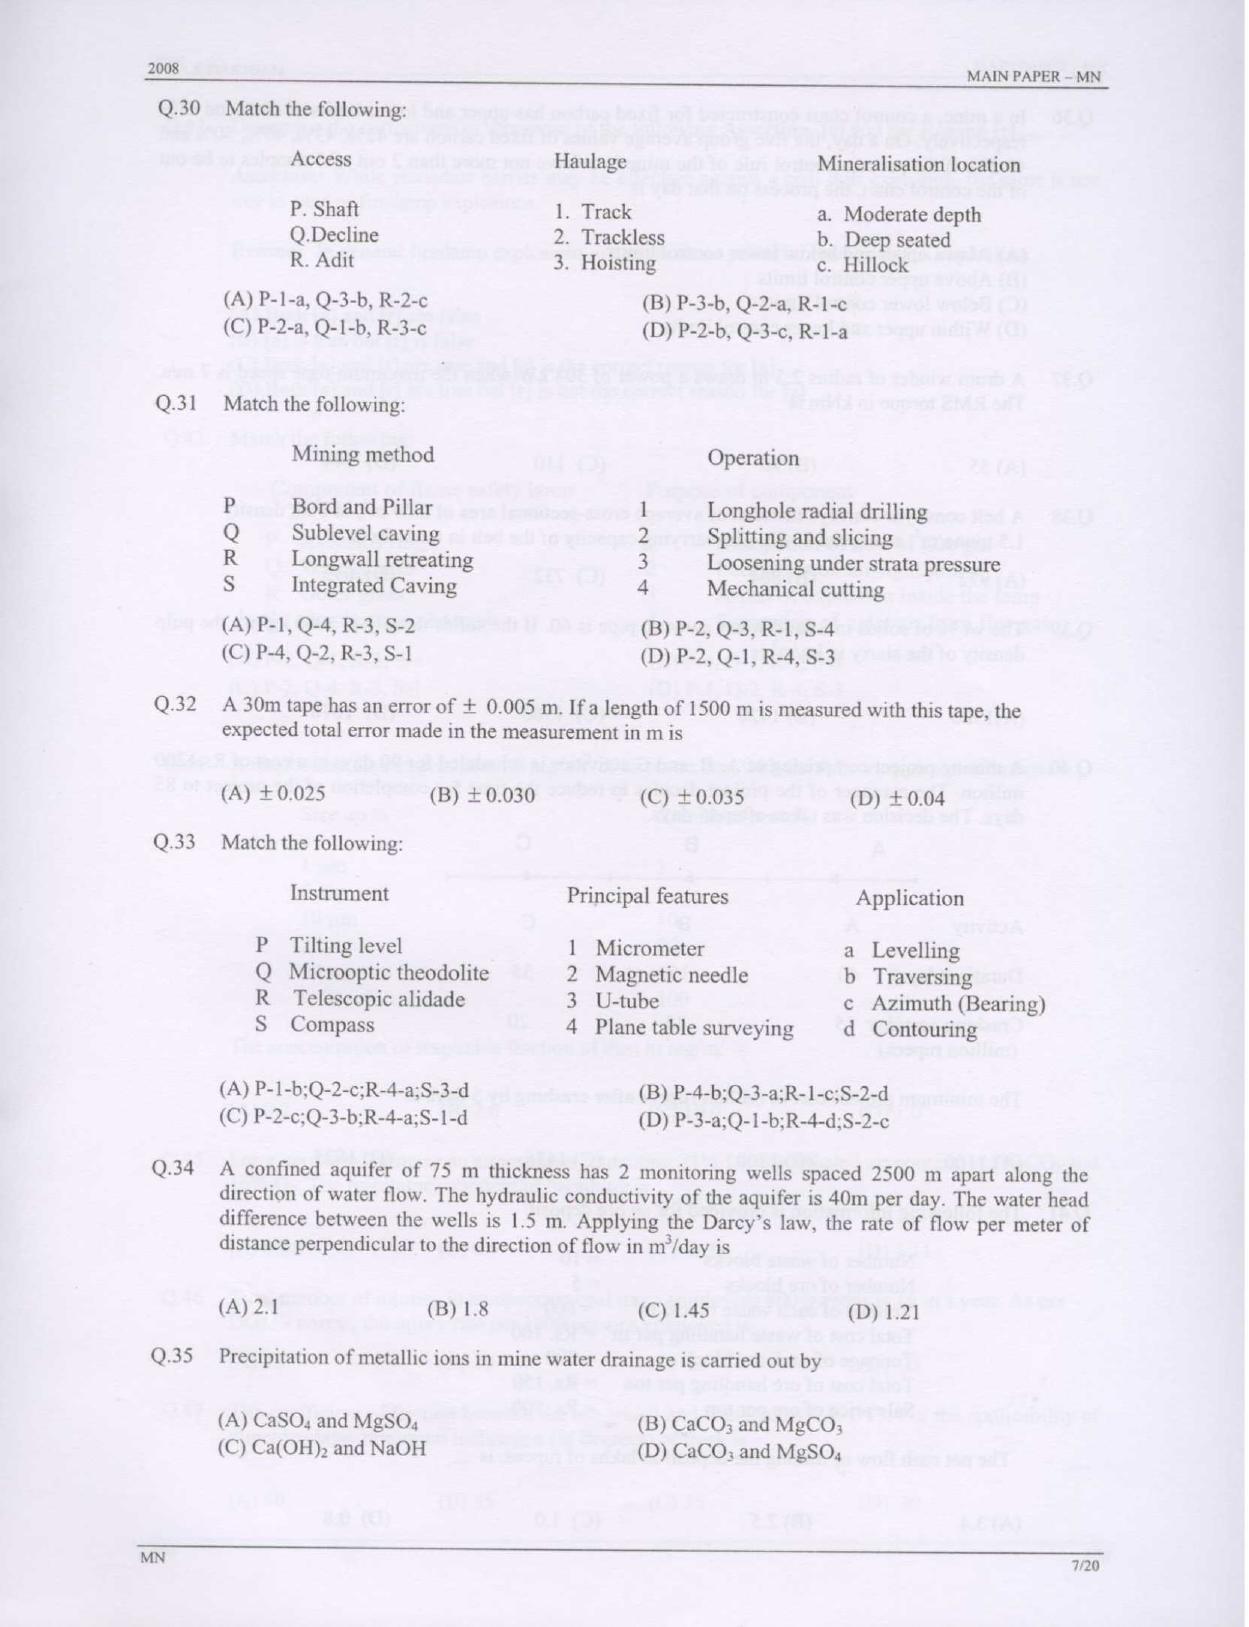 GATE 2008 Mining Engineering (MN) Question Paper with Answer Key - Page 7